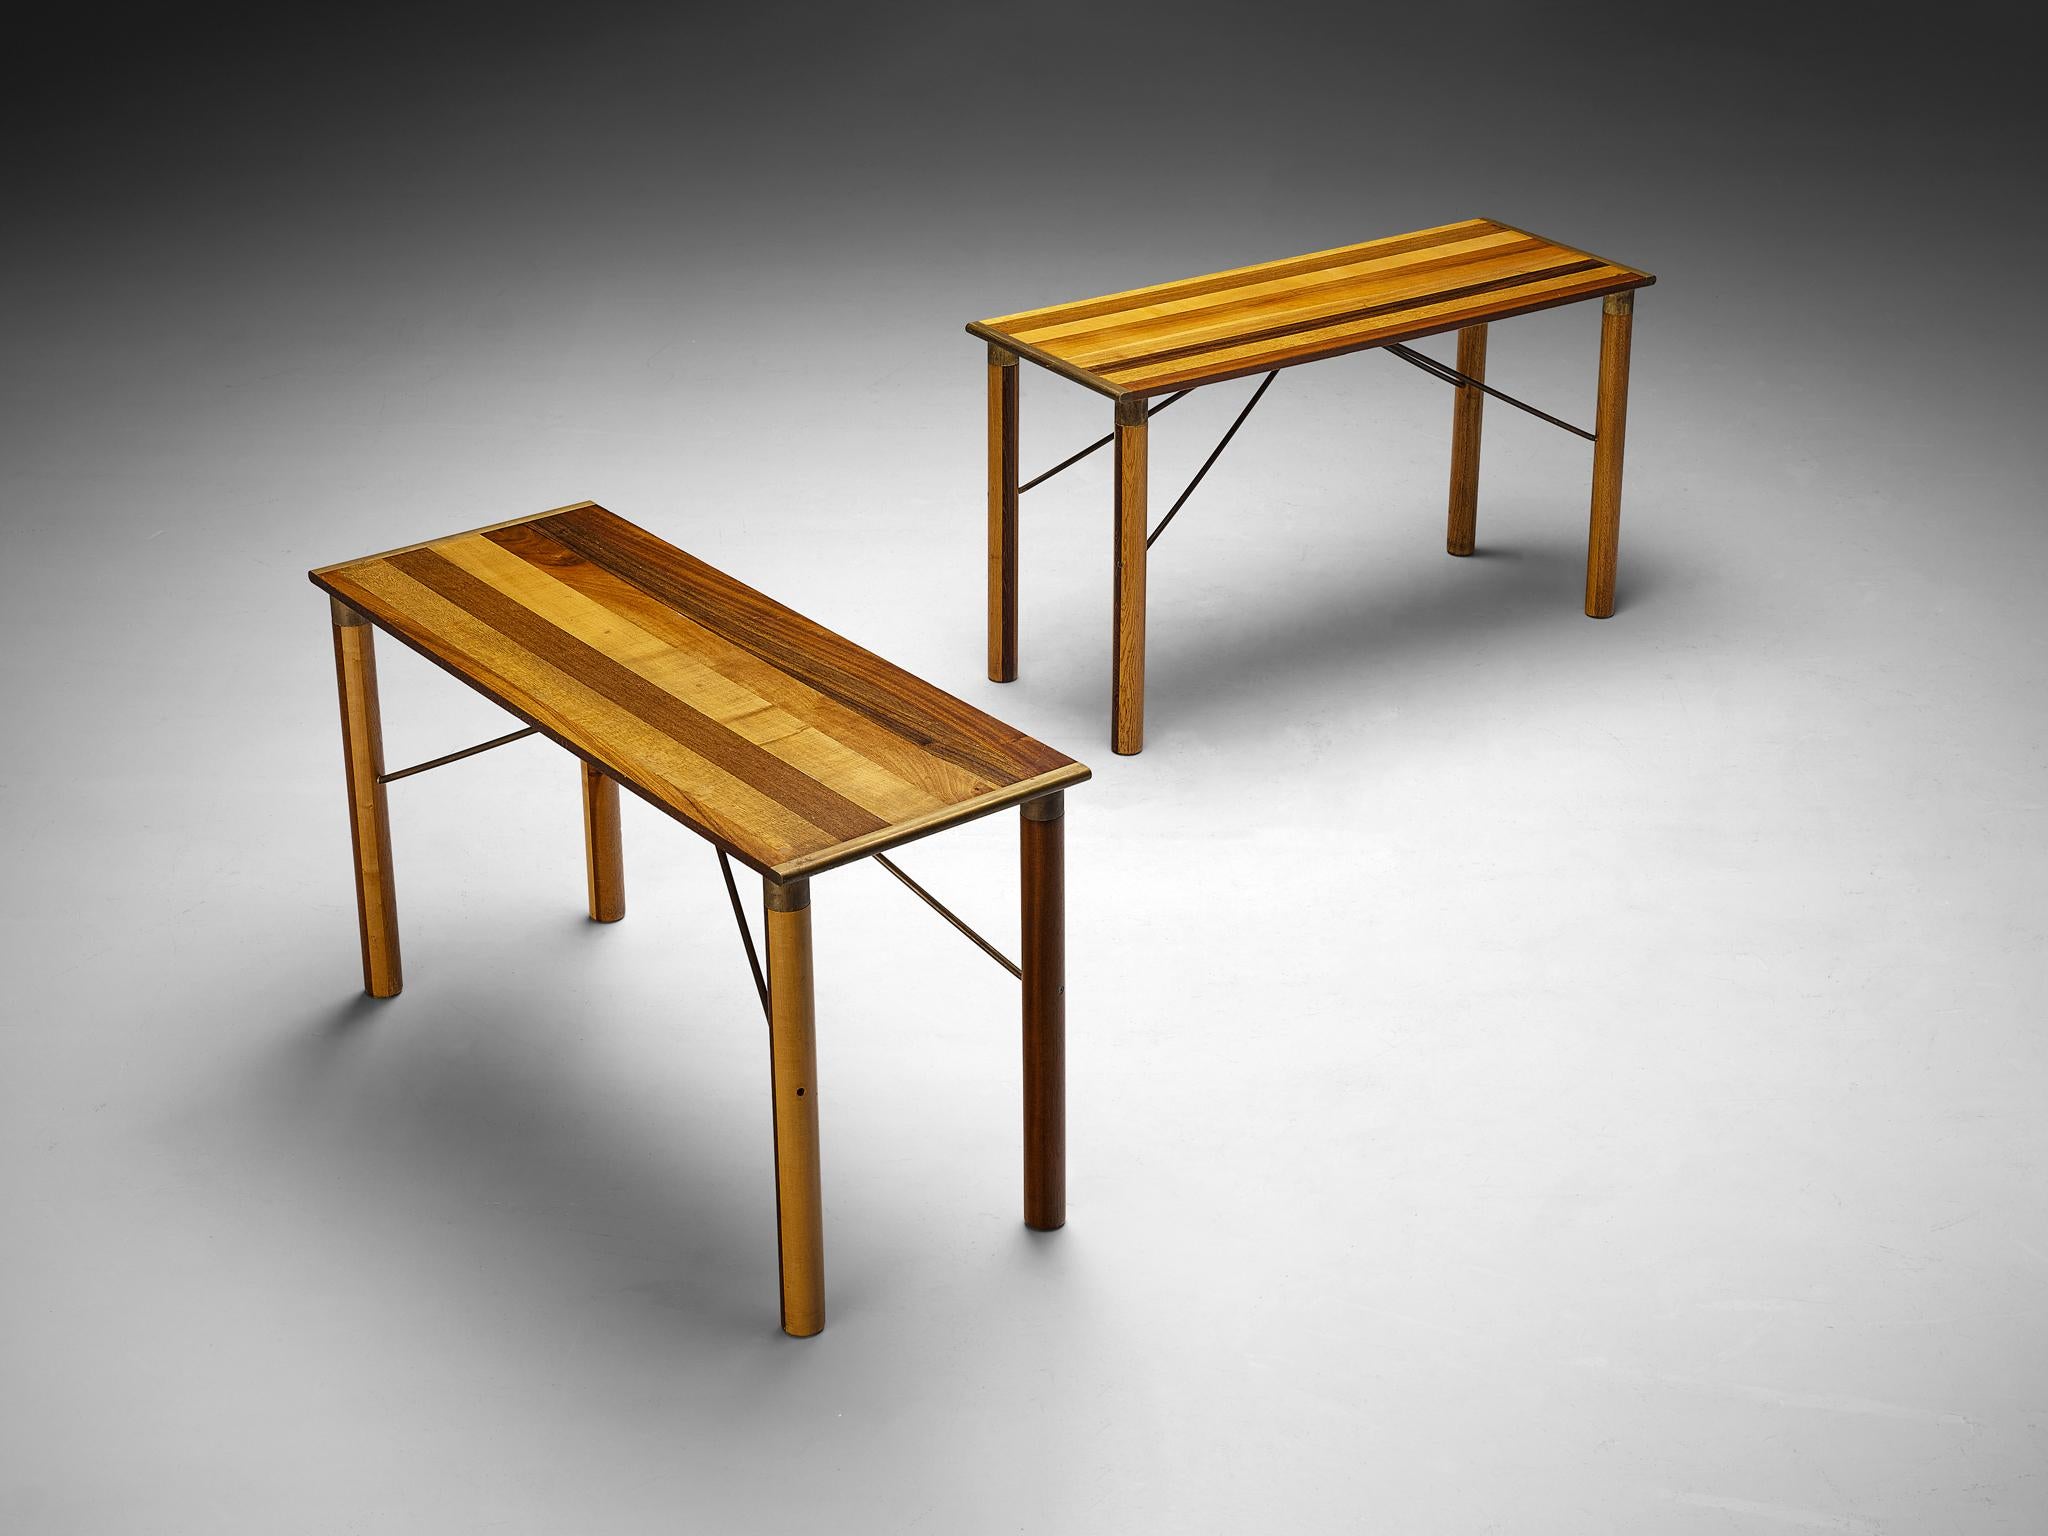 Afra & Tobia Scarpa for Benetton, consoles, walnut, wenge, ash, oak, brass, Italy, 1970s

We present exquisitely crafted tables designed by Afra and Tobia Scarpa for the Benetton shop. These tables embody excellence in every aspect—from form and